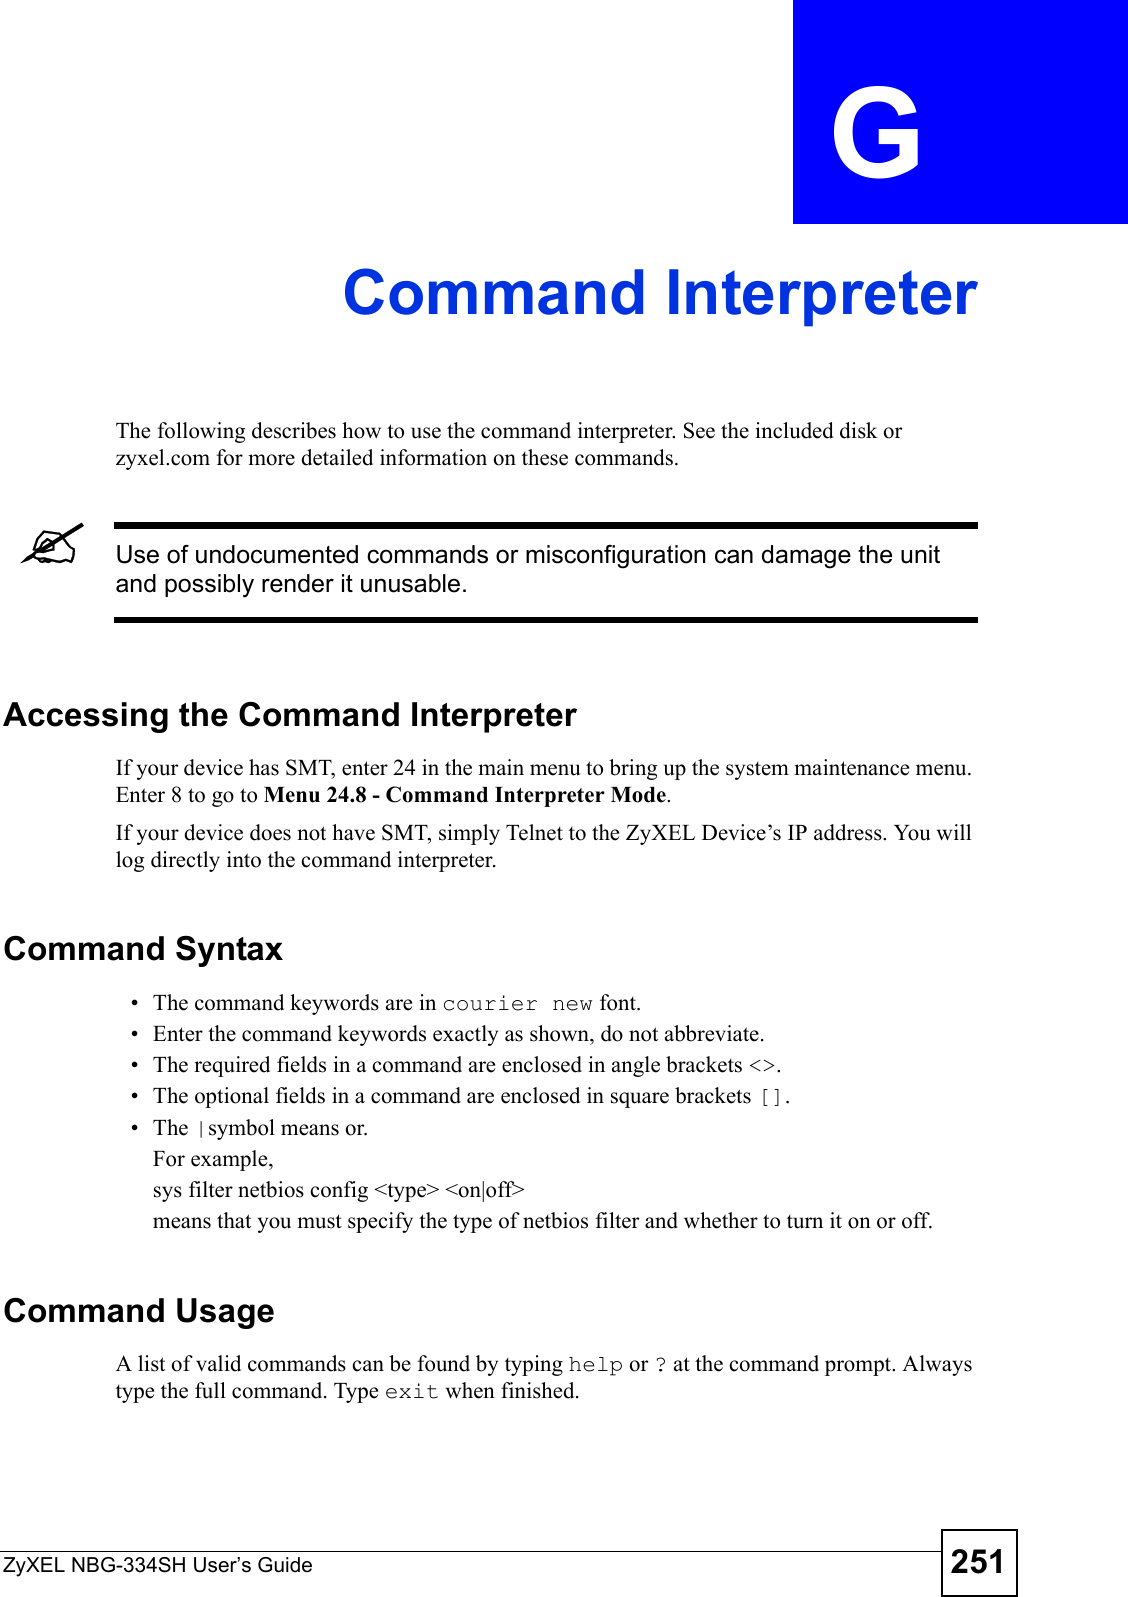 ZyXEL NBG-334SH User’s Guide 251APPENDIX  G Command InterpreterThe following describes how to use the command interpreter. See the included disk or zyxel.com for more detailed information on these commands.&quot;Use of undocumented commands or misconfiguration can damage the unit and possibly render it unusable.Accessing the Command InterpreterIf your device has SMT, enter 24 in the main menu to bring up the system maintenance menu. Enter 8 to go to Menu 24.8 - Command Interpreter Mode. If your device does not have SMT, simply Telnet to the ZyXEL Device’s IP address. You will log directly into the command interpreter.  Command Syntax• The command keywords are in courier new font.• Enter the command keywords exactly as shown, do not abbreviate.• The required fields in a command are enclosed in angle brackets &lt;&gt;. • The optional fields in a command are enclosed in square brackets [].•The |symbol means or.For example,sys filter netbios config &lt;type&gt; &lt;on|off&gt;means that you must specify the type of netbios filter and whether to turn it on or off.Command UsageA list of valid commands can be found by typing help or ? at the command prompt. Always type the full command. Type exit when finished.